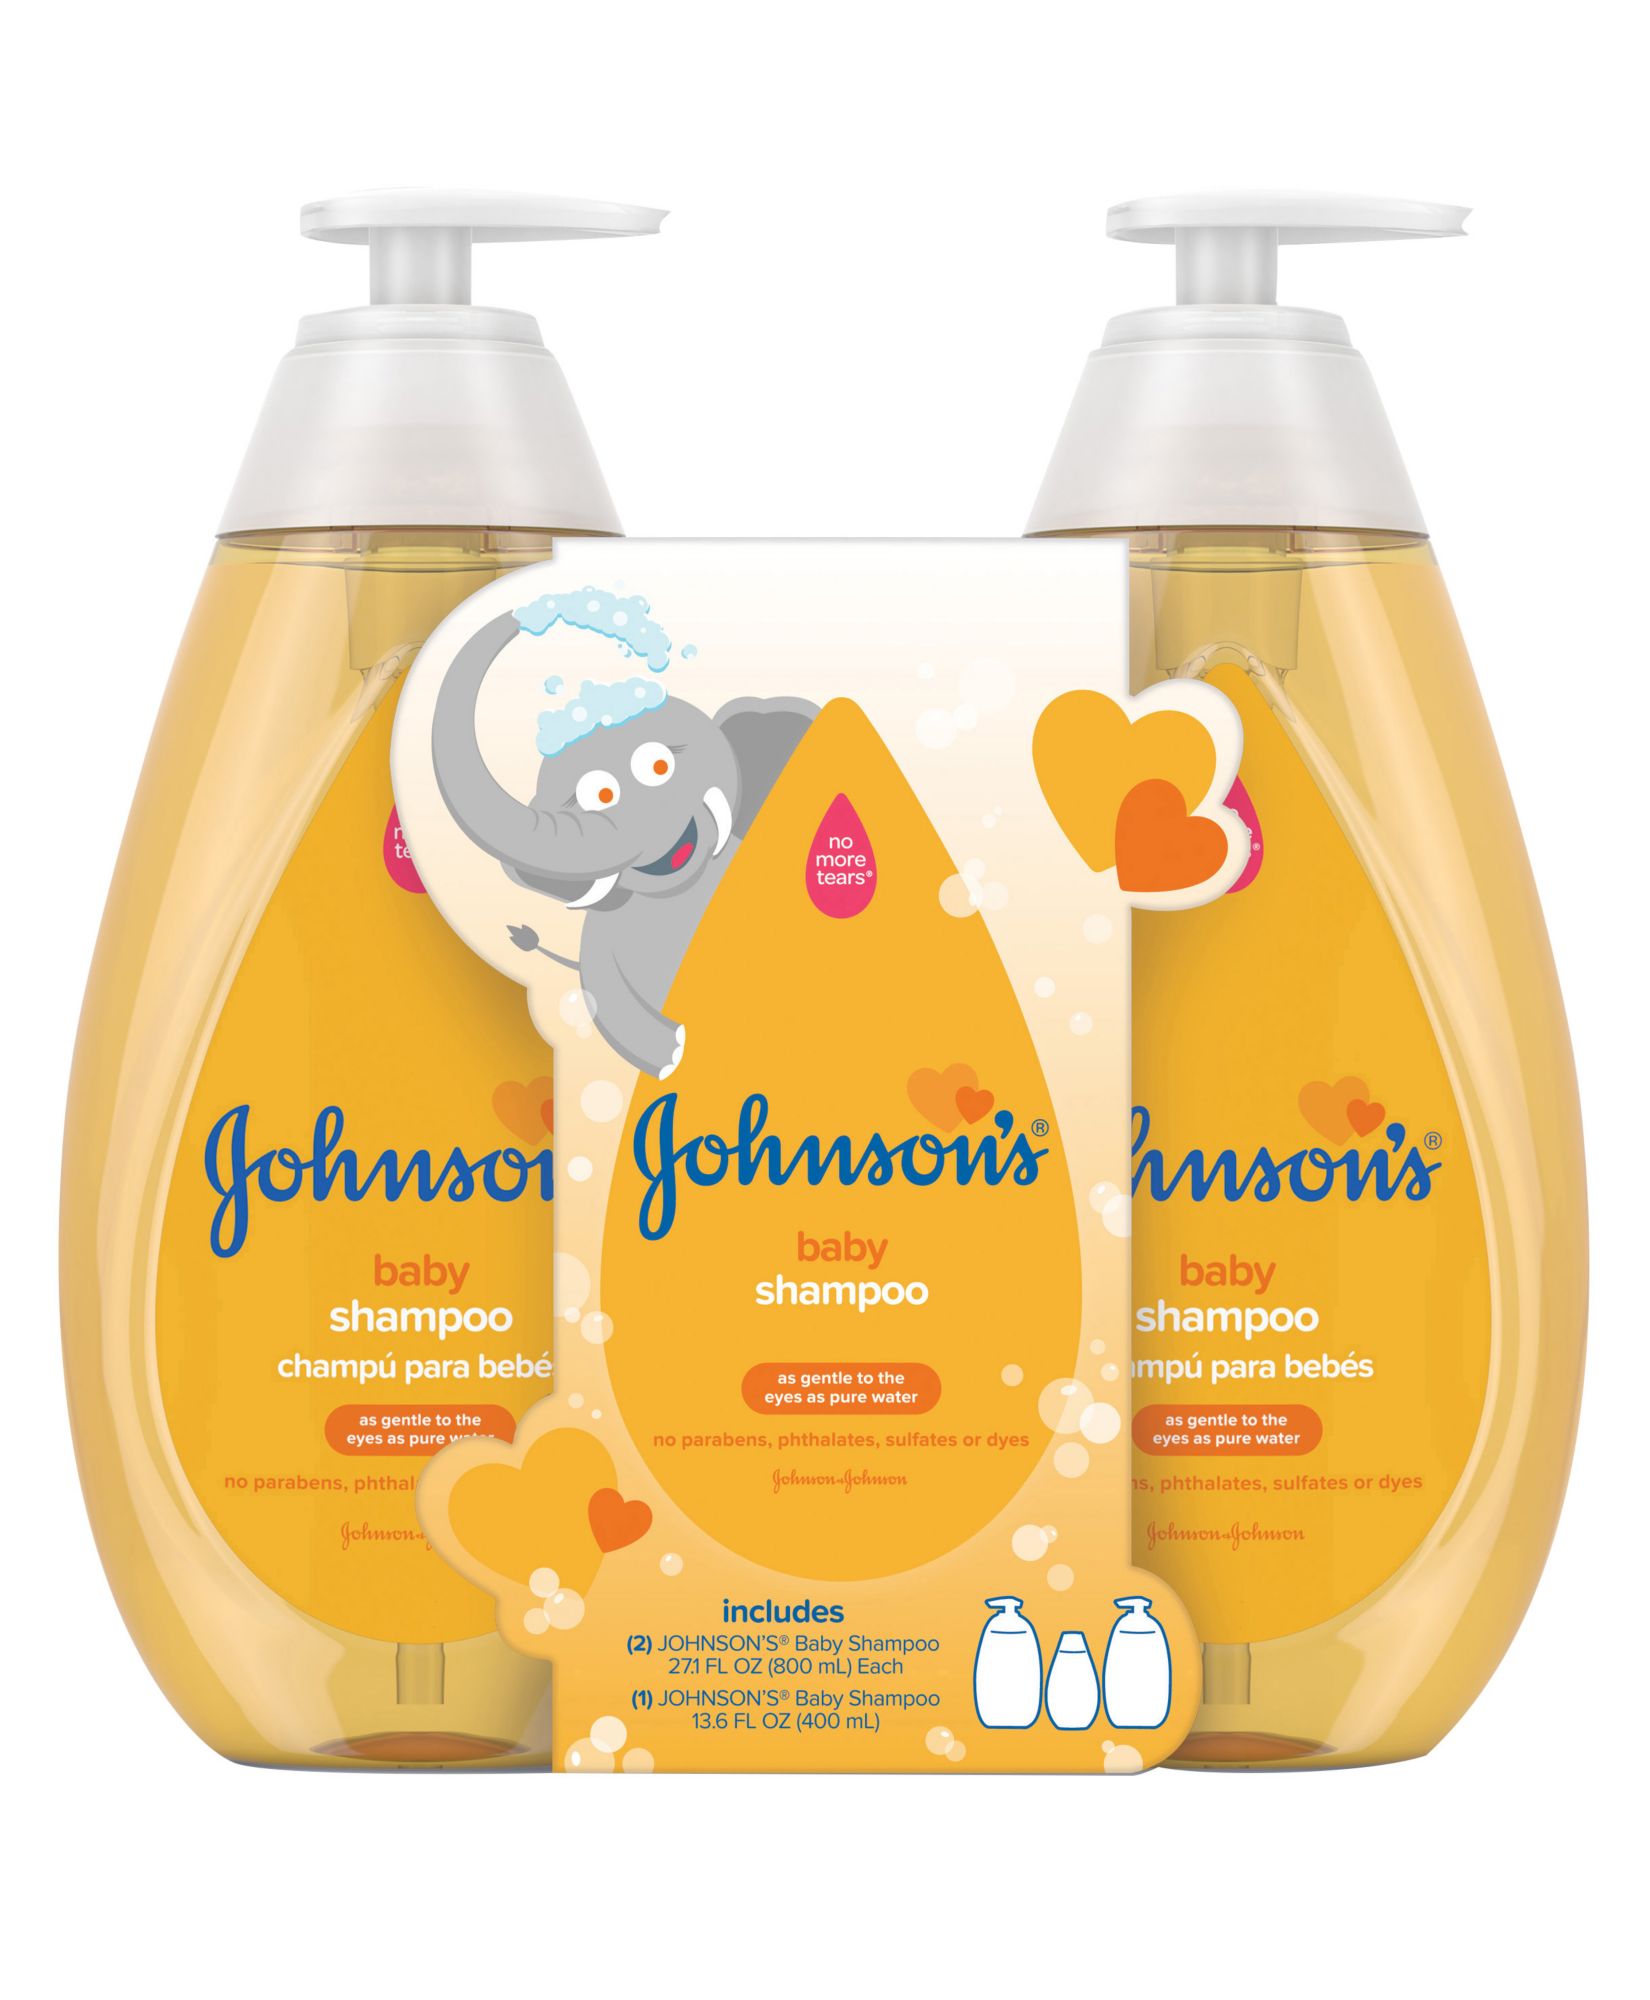 baby shampoo for adults with fine hair